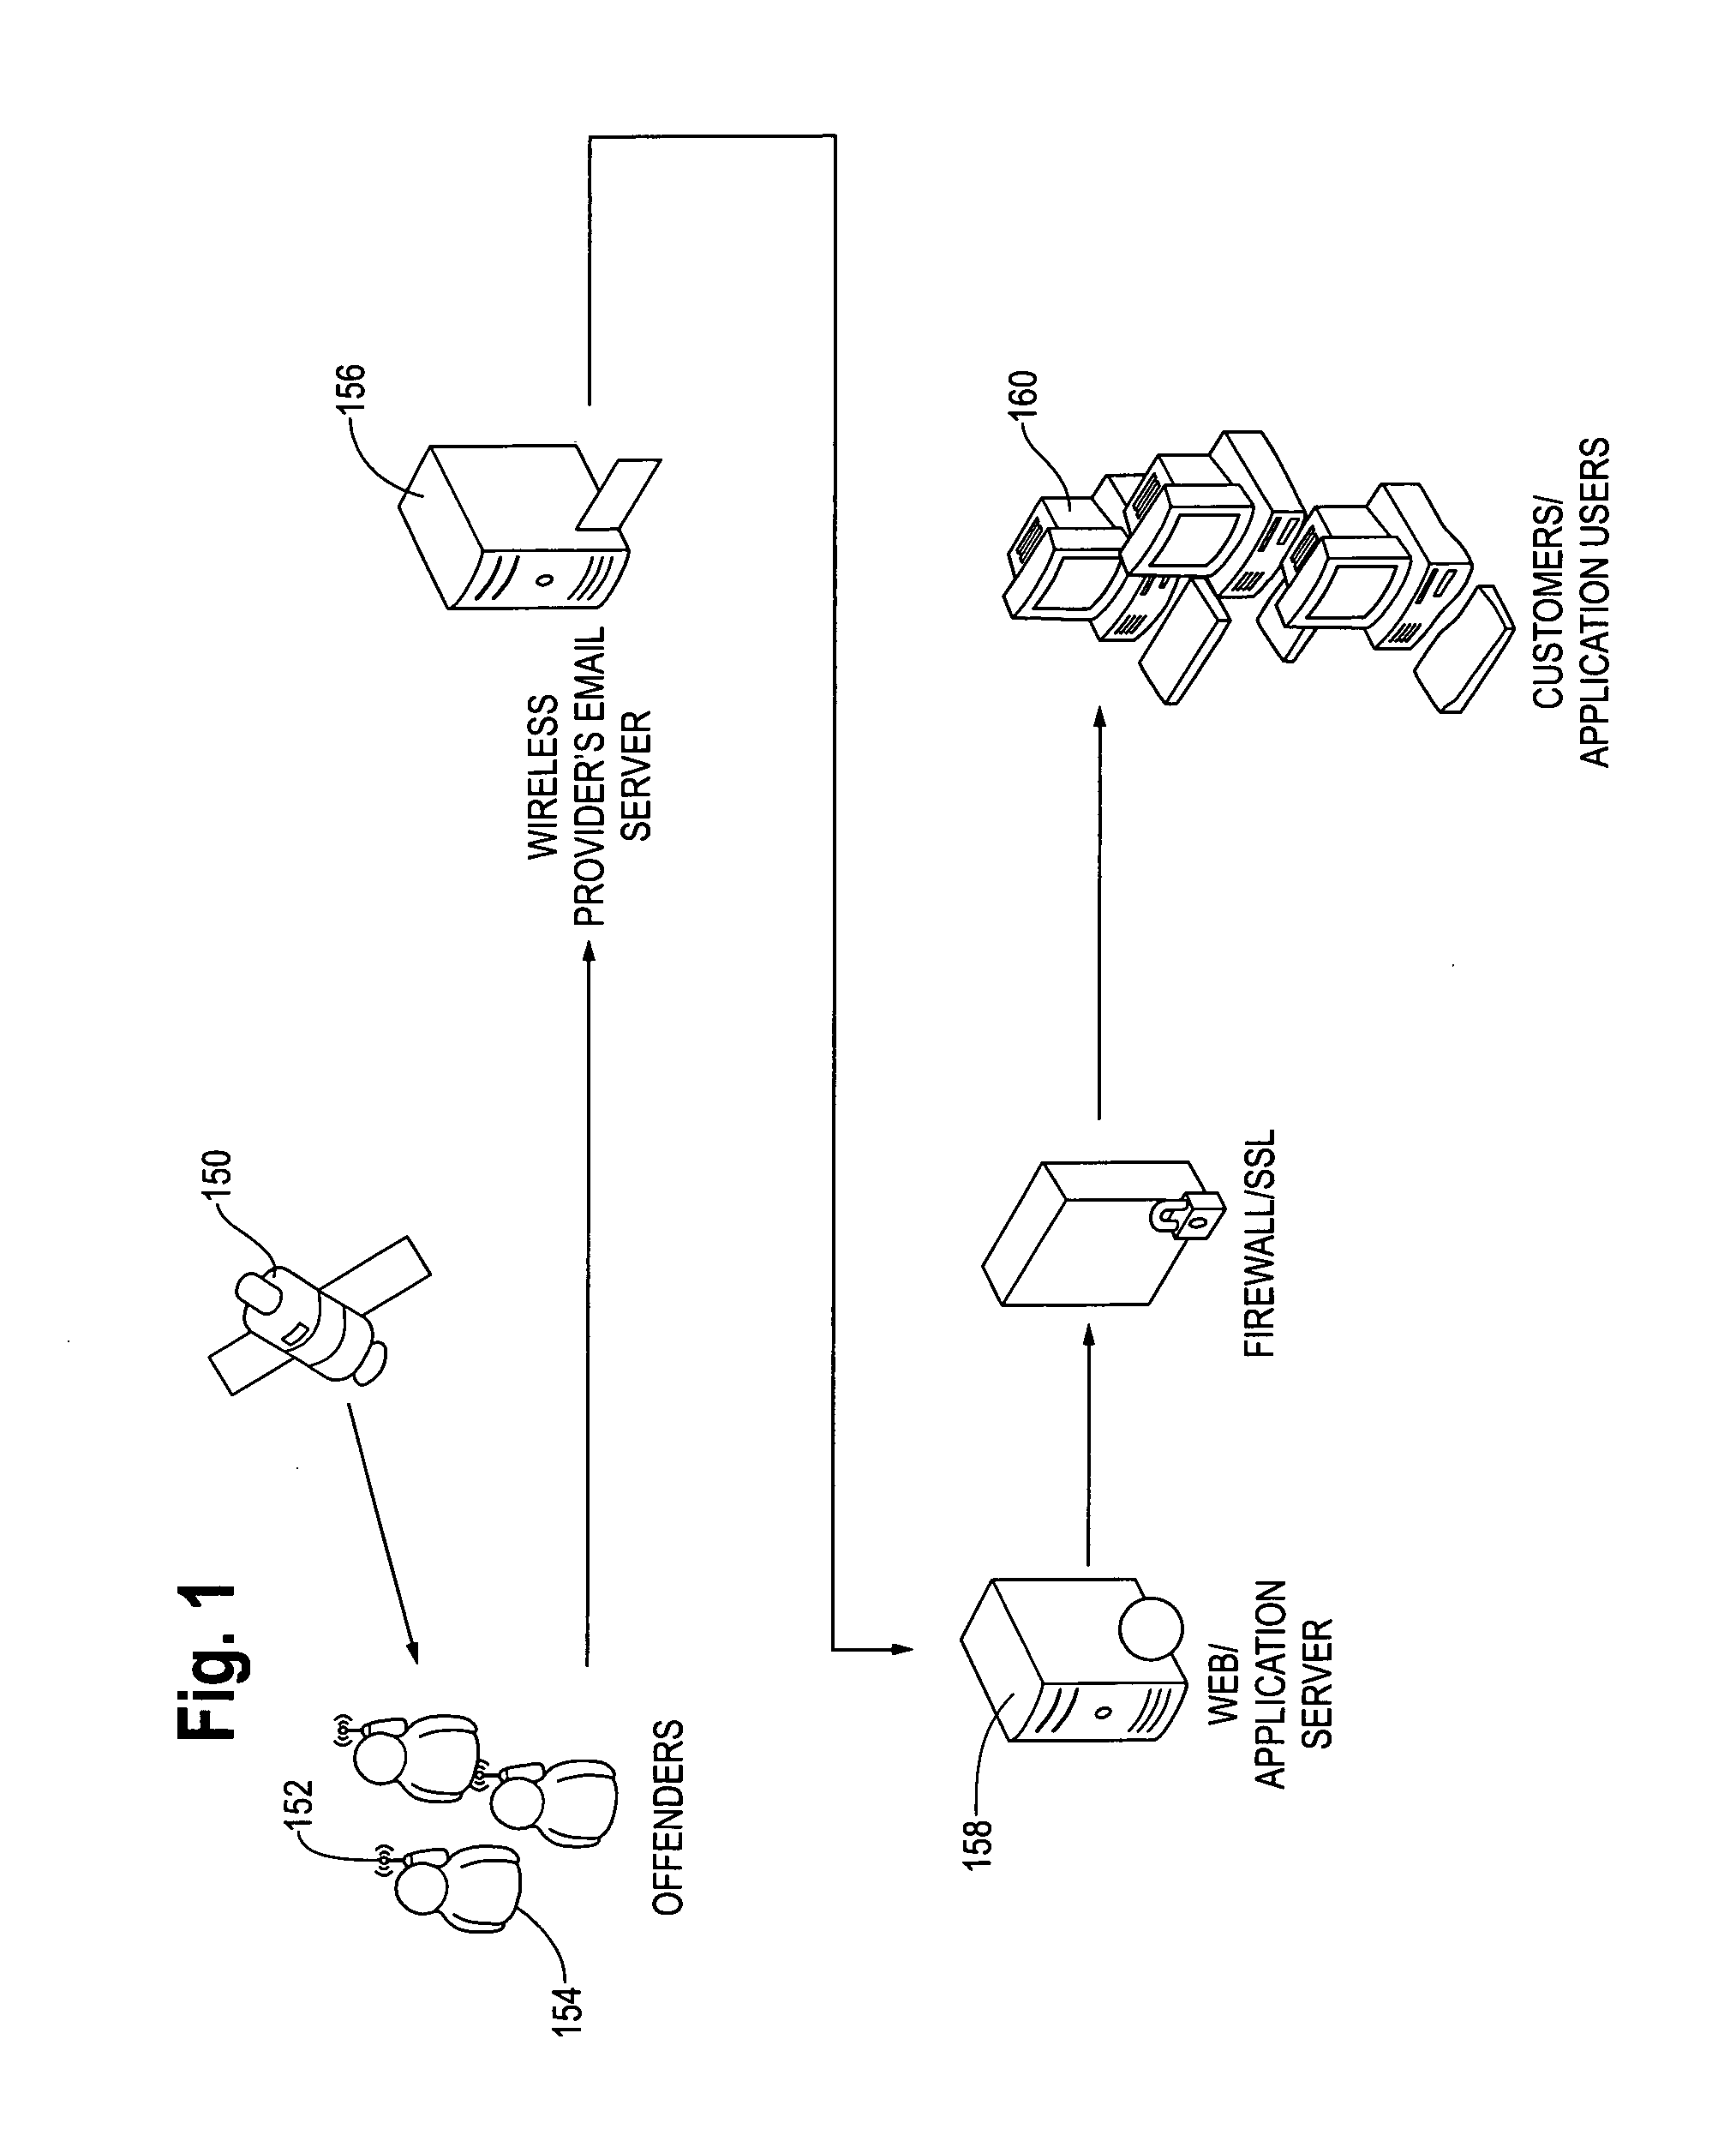 Method and apparatus for monitoring persons